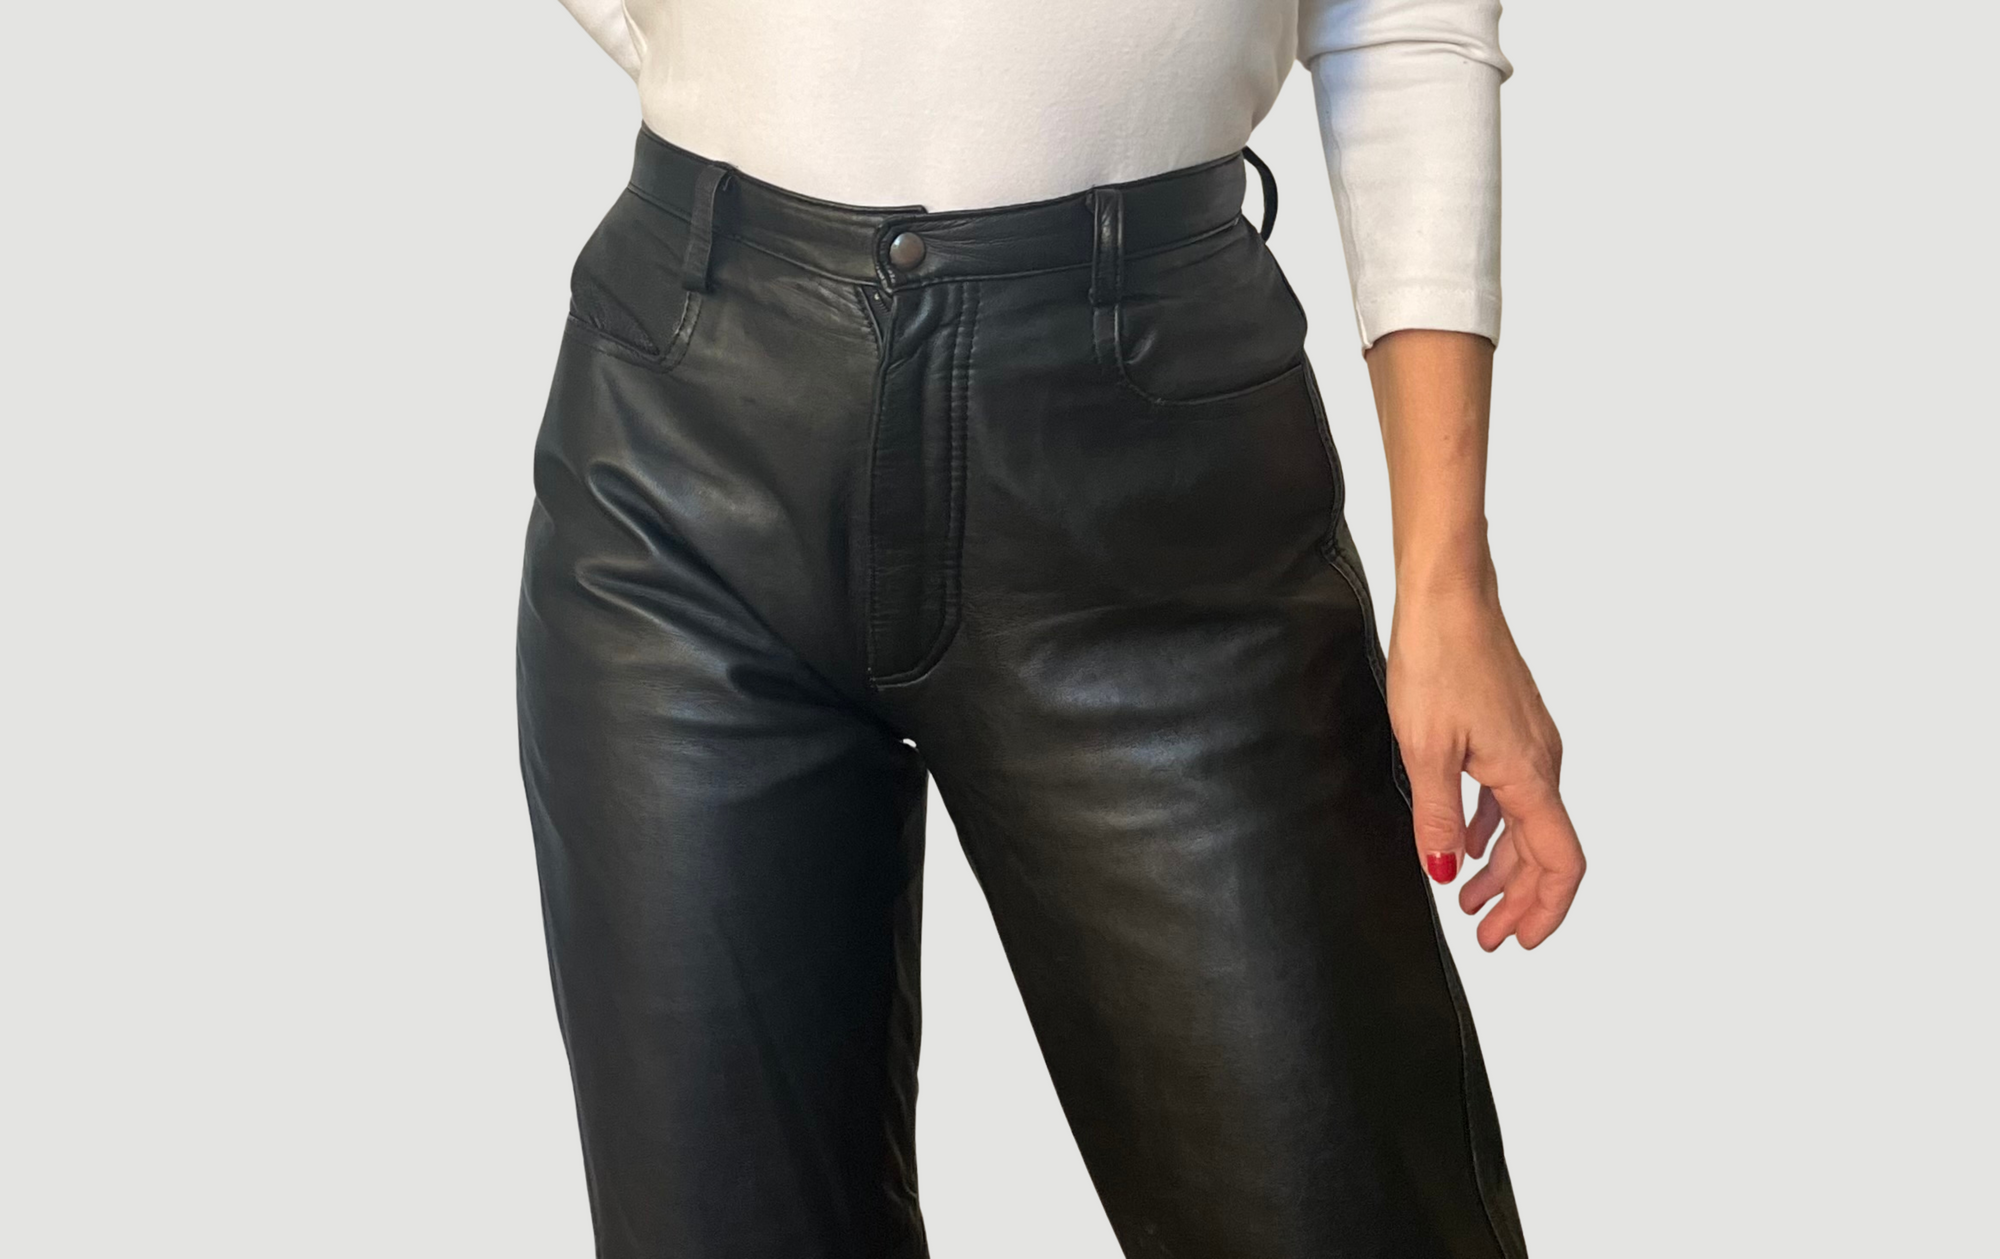 Black Leather trousers